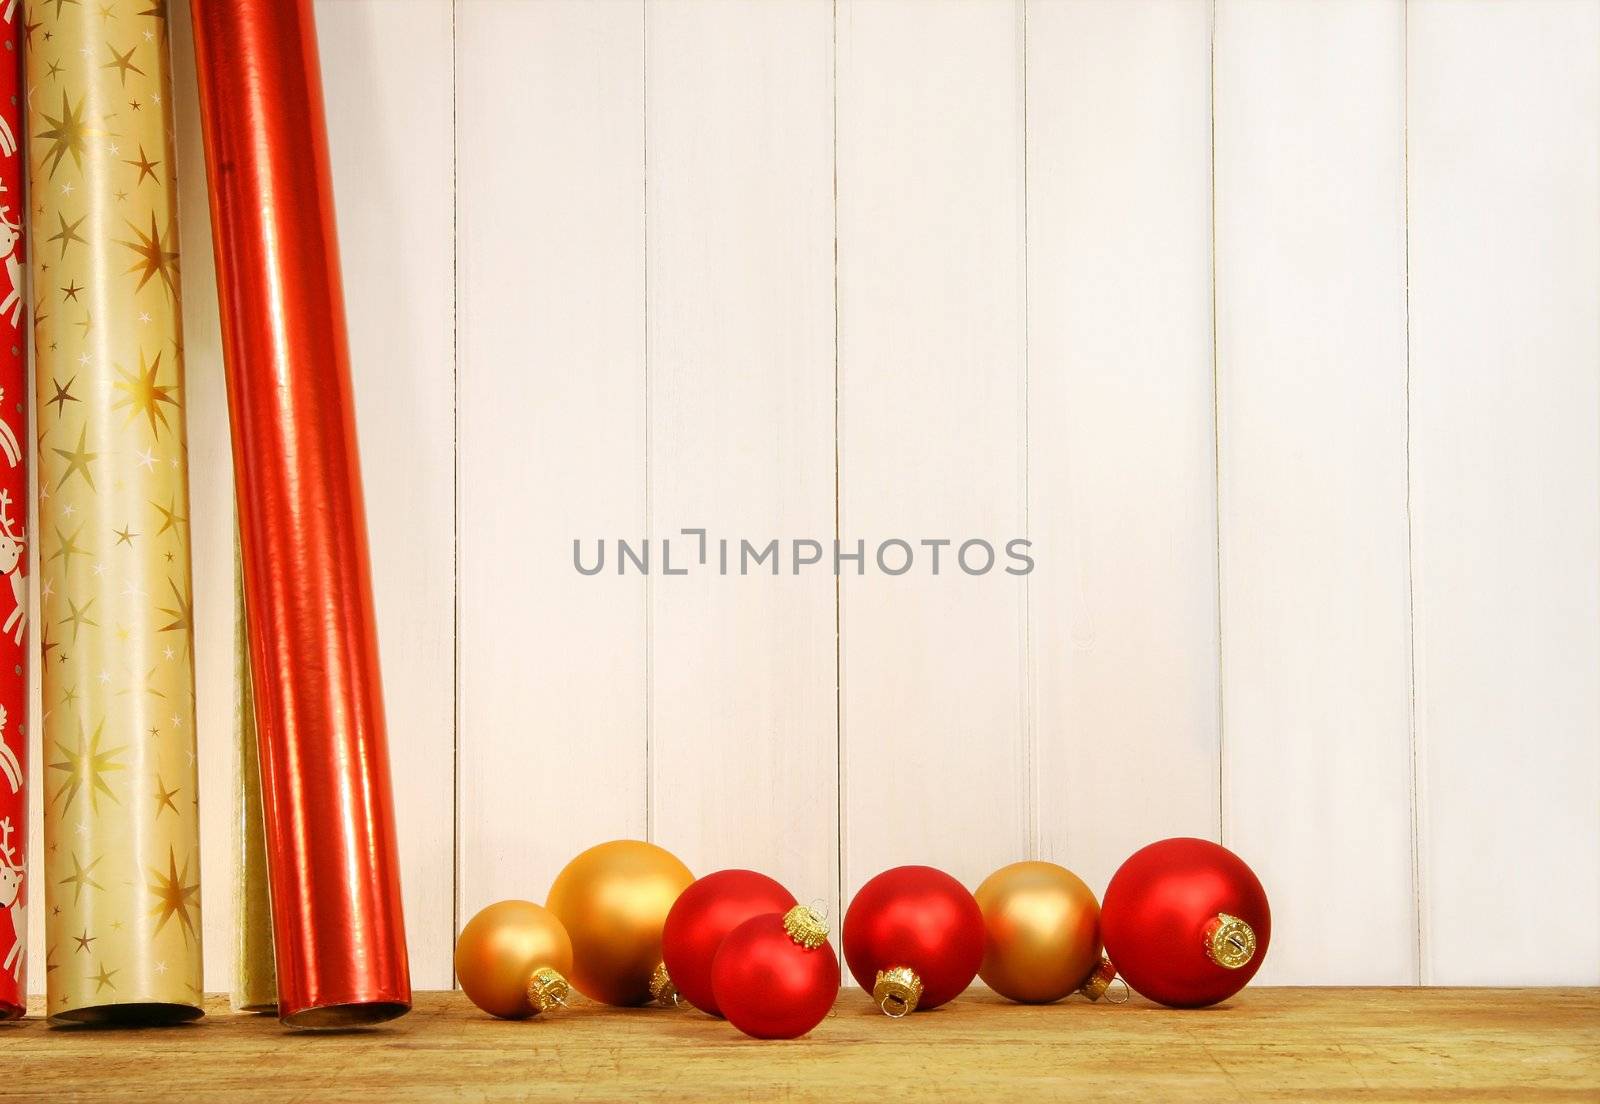 Rolls of holiday wrapping paper against wall with glass balls